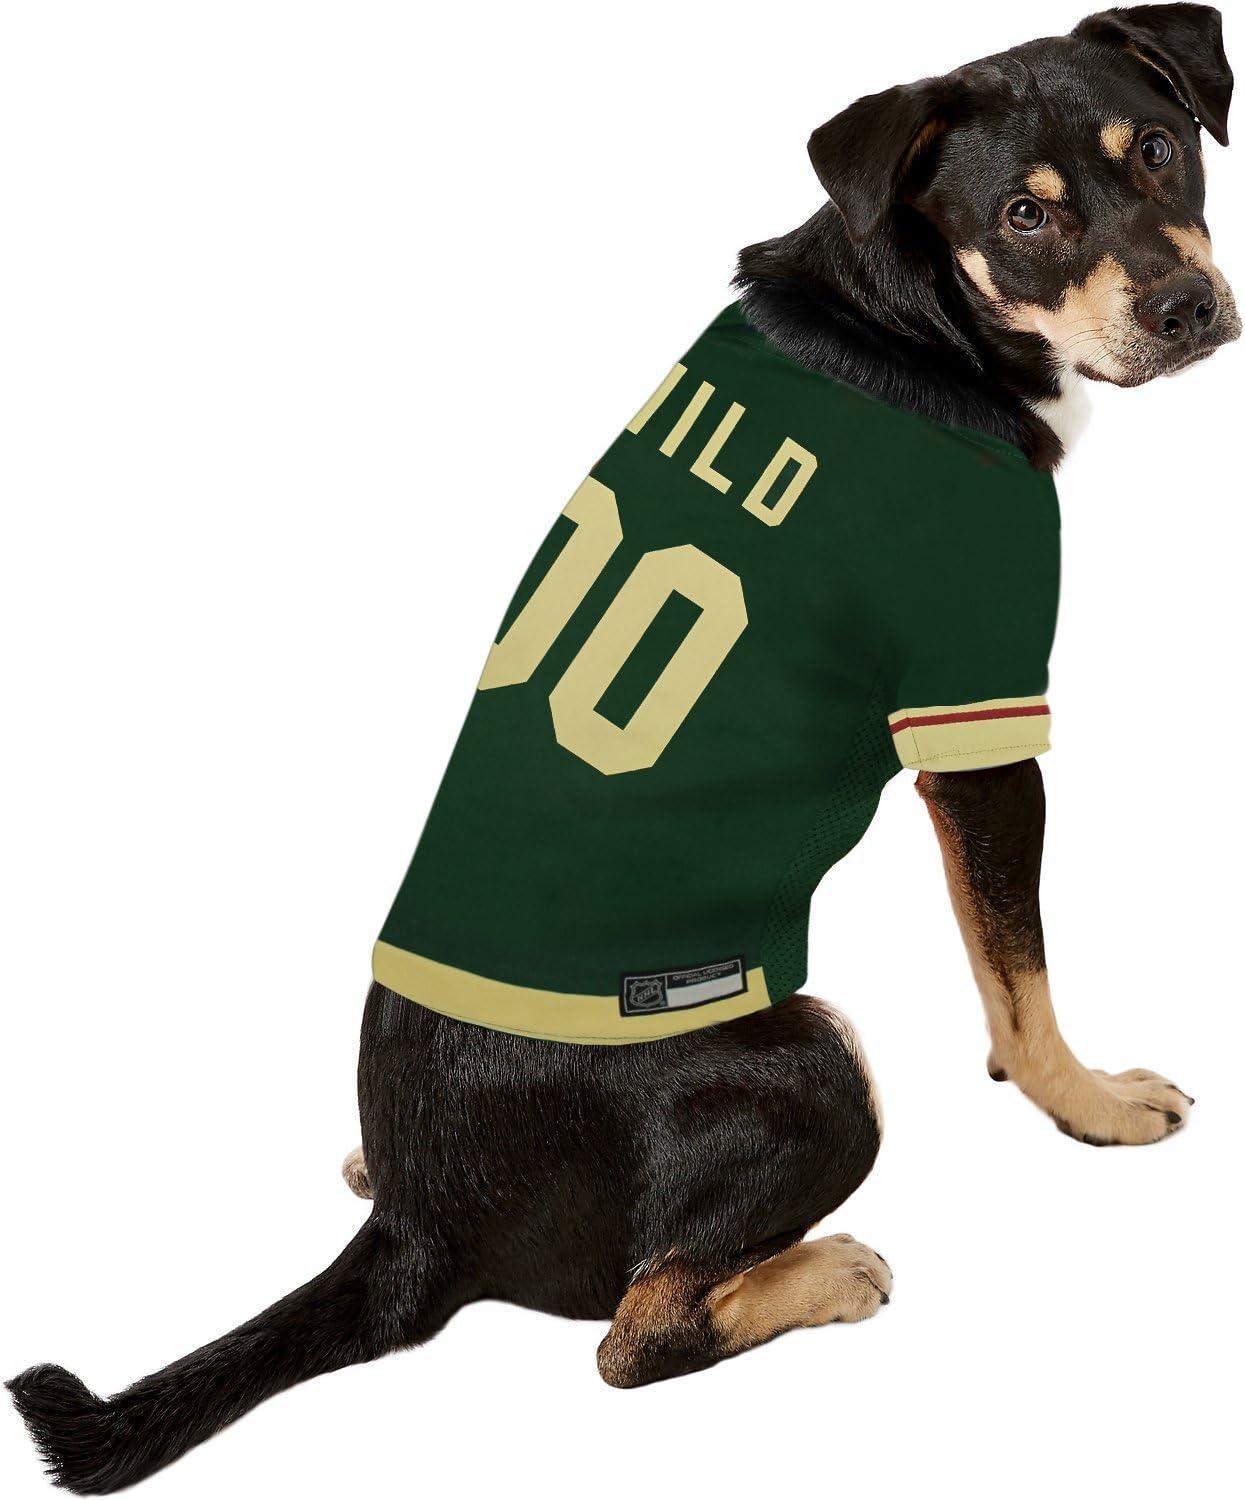 NHL Minnesota Wild Jersey for Dogs & Cats, Small. - Let Your Pet